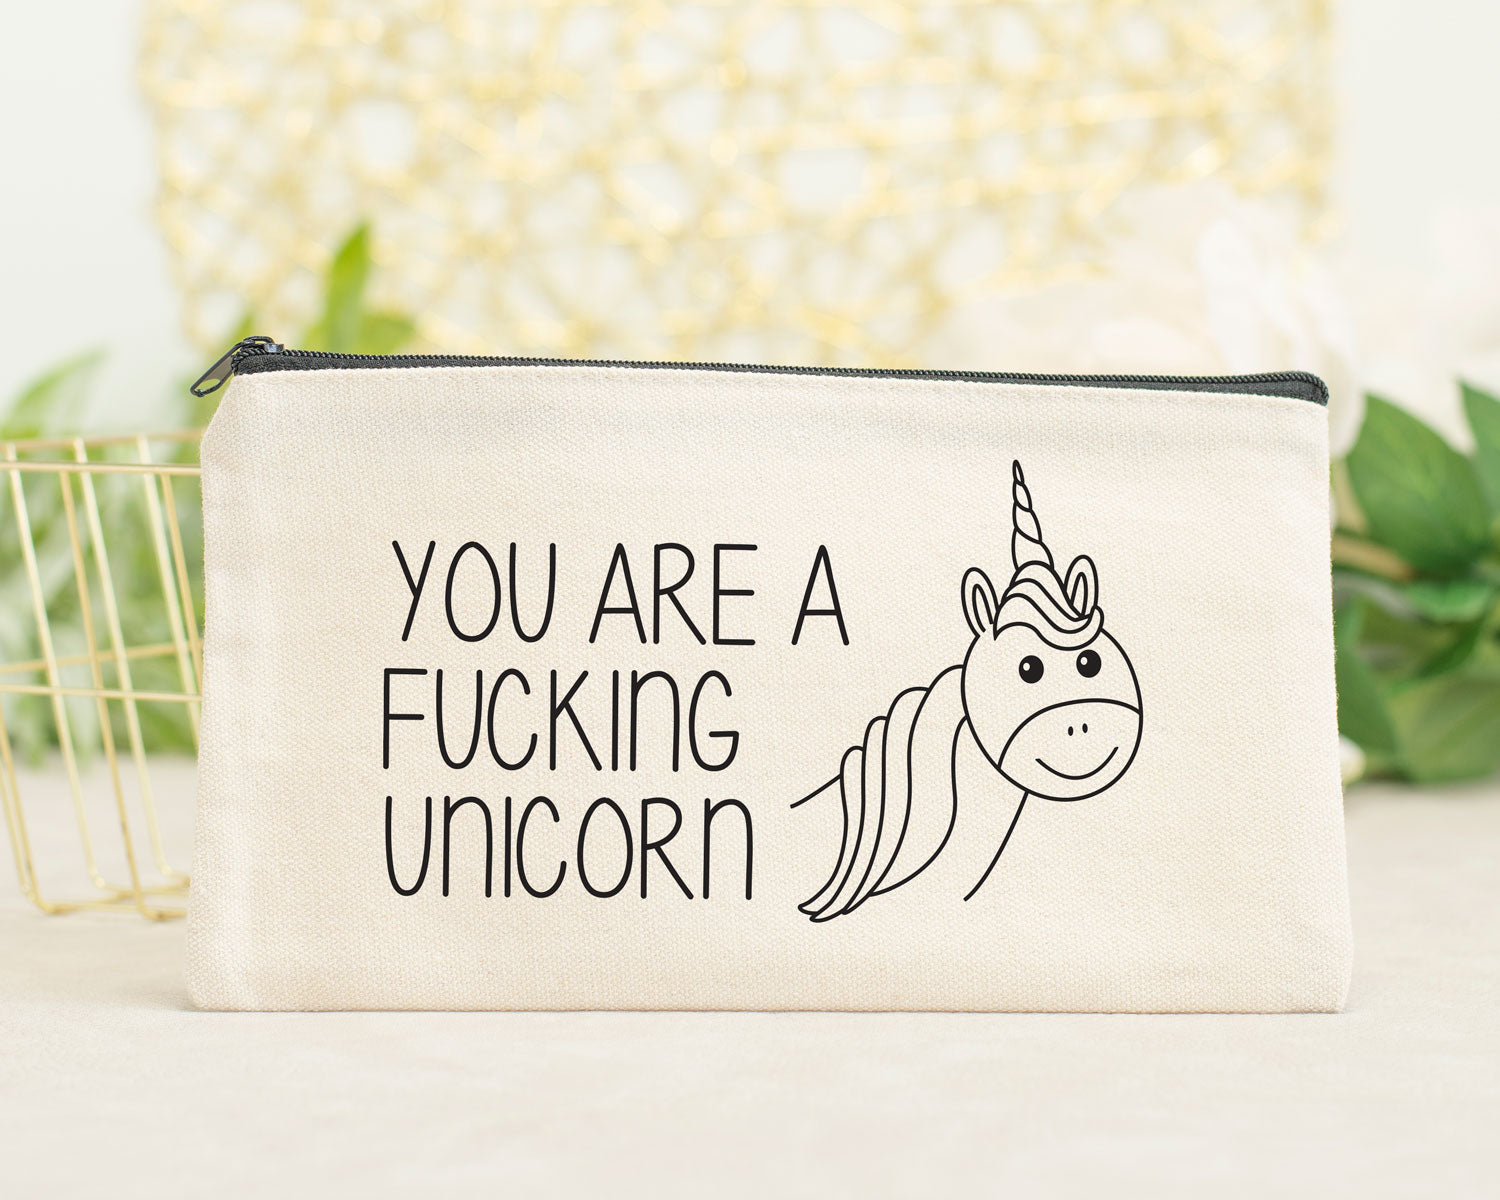 You are a Fucking Unicorn Zippered Canvas Pouch, Cosmetic Pouch, Reuseable Bag